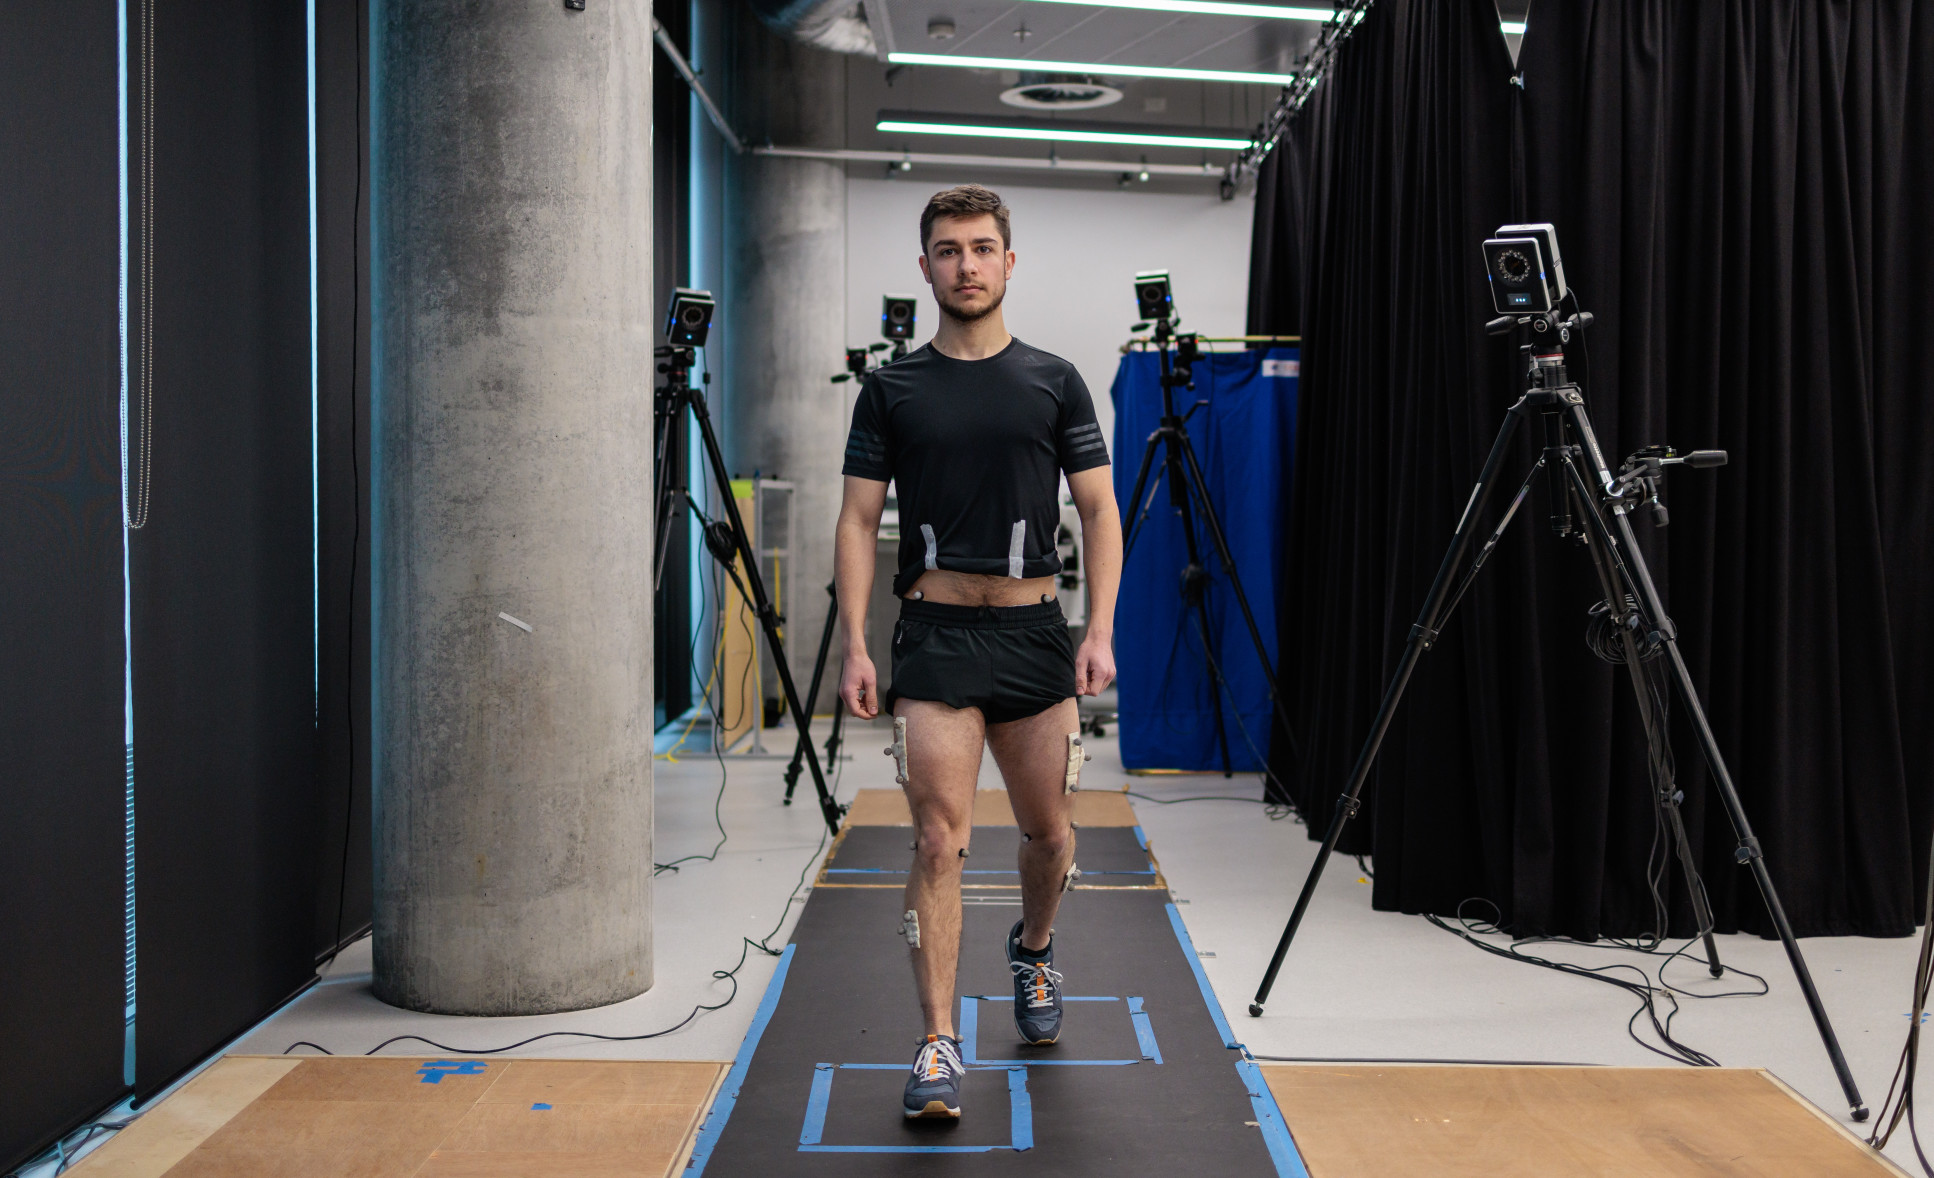 A demonstration of how motion capture technology analyses the movements of people using prosthetic limbs in detail to see how they can be improved.